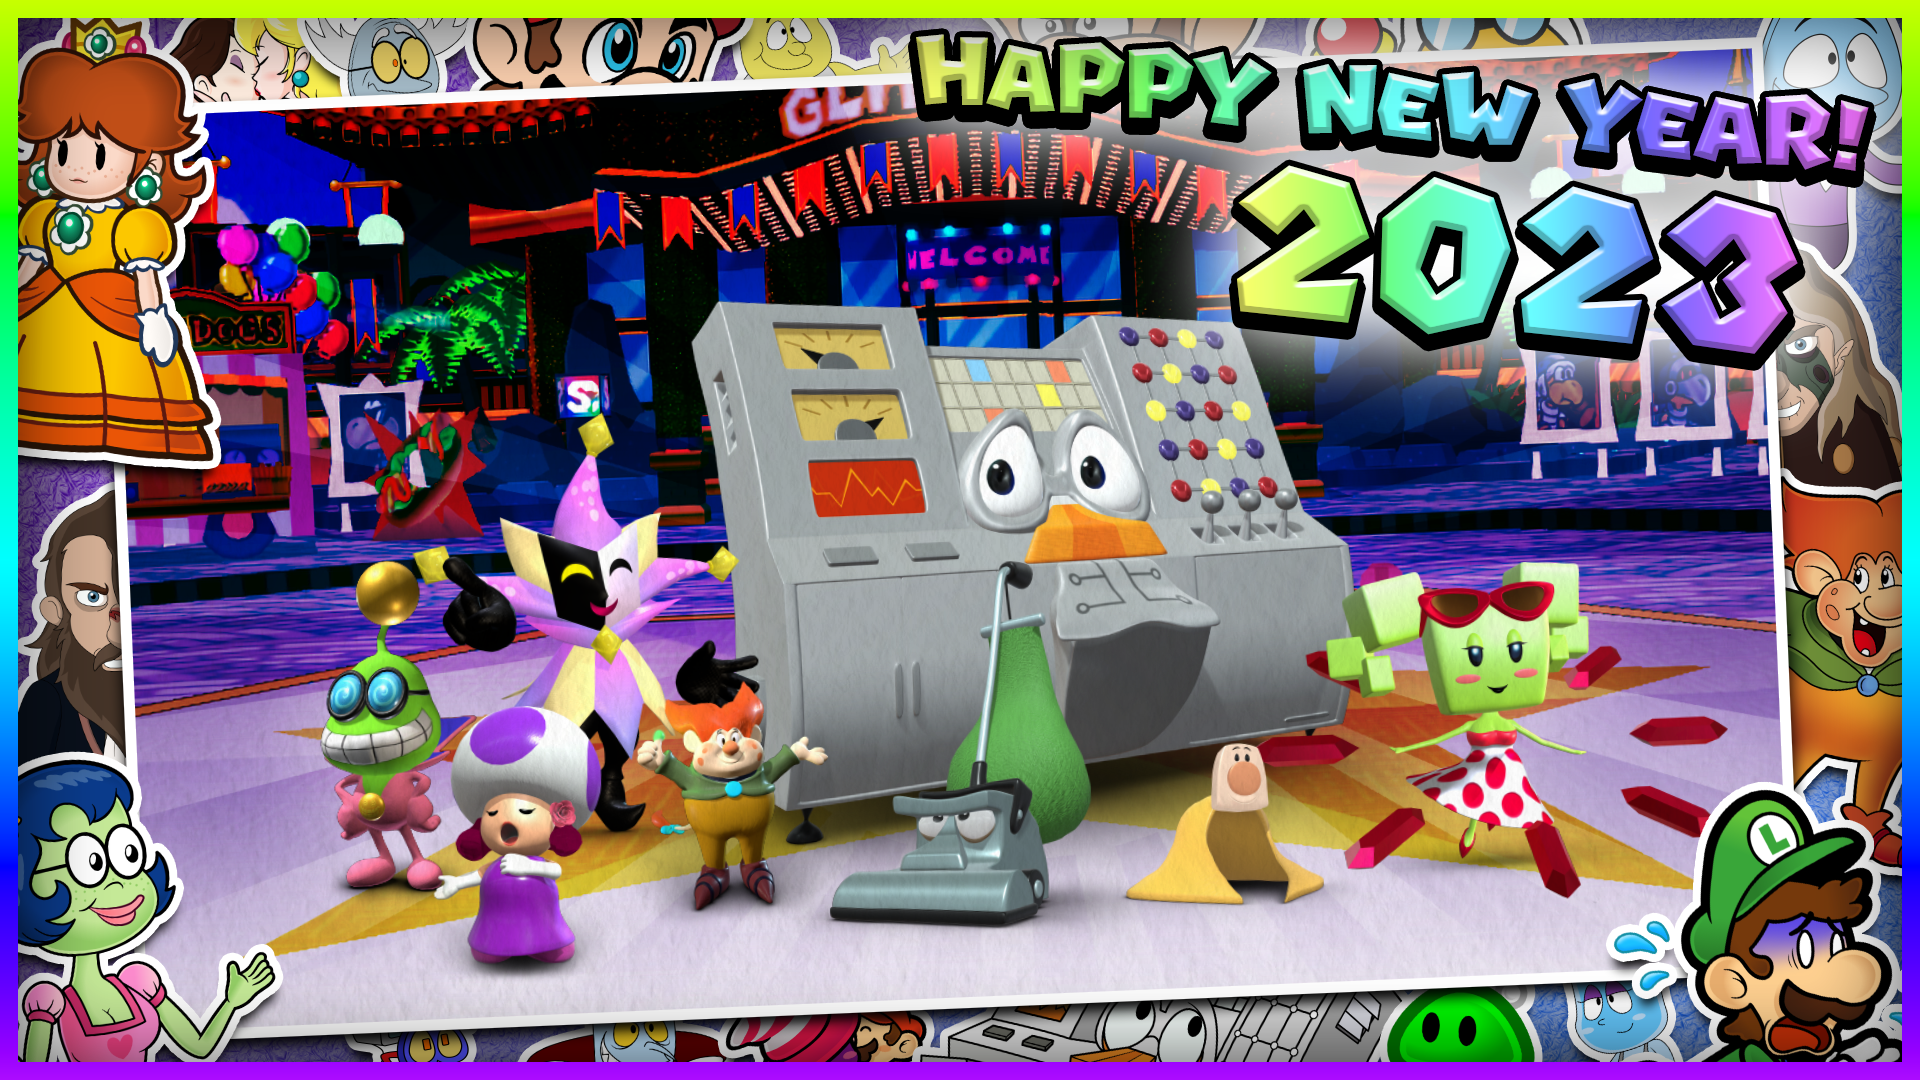 Happy New Year 2023.png